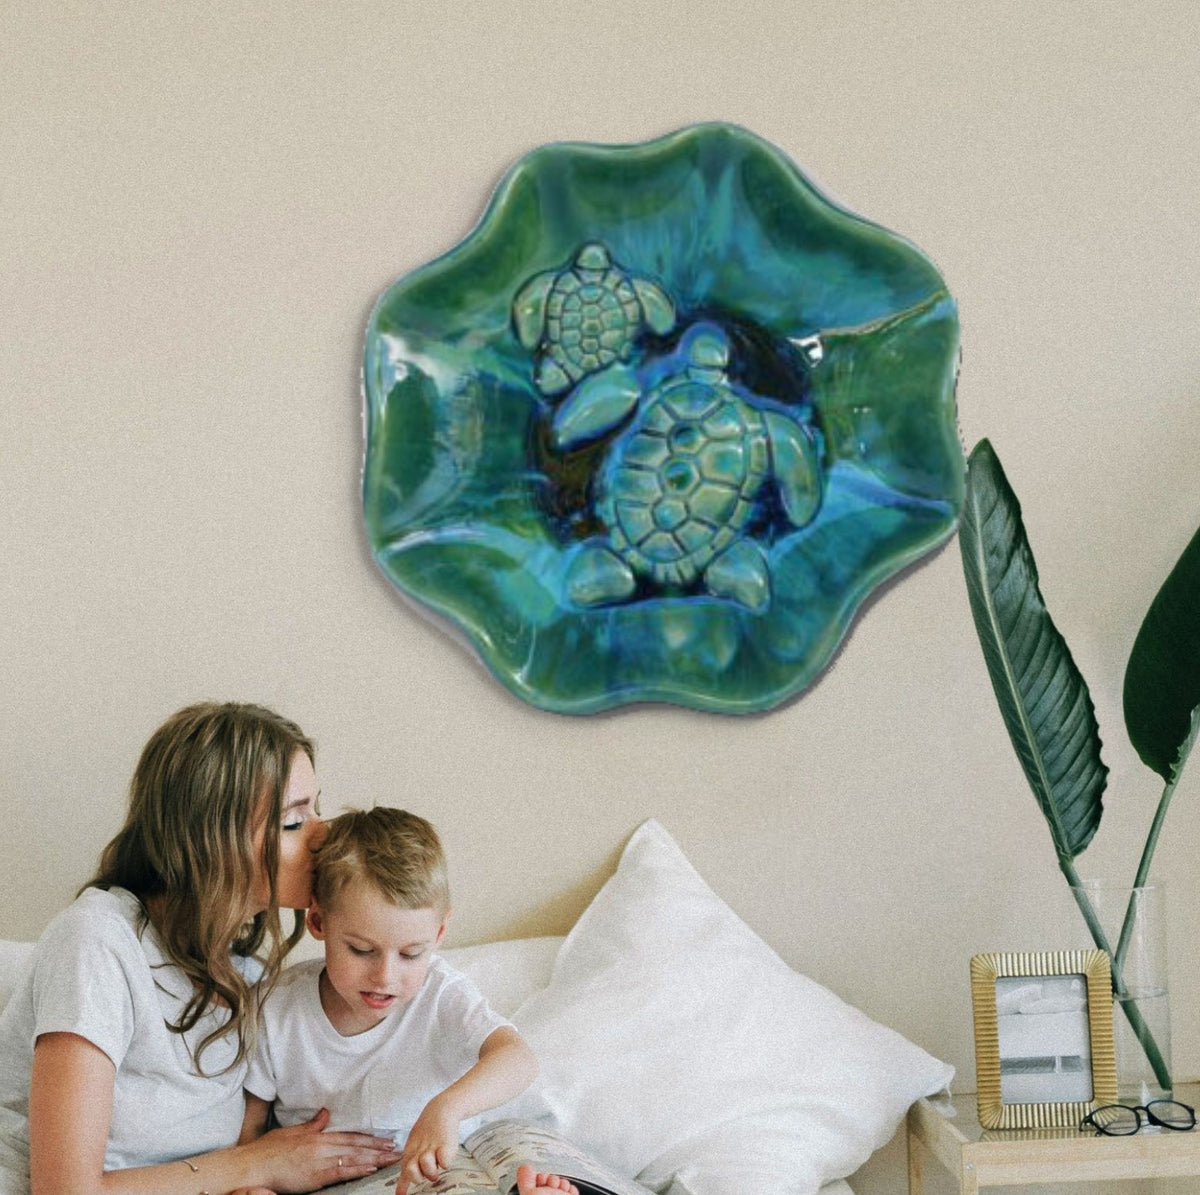 Ceramic turtle wall plaque designs boast a distinct 3D relief technique, meticulously crafted to enhance the intricate anatomy of the Hawaiian turtle